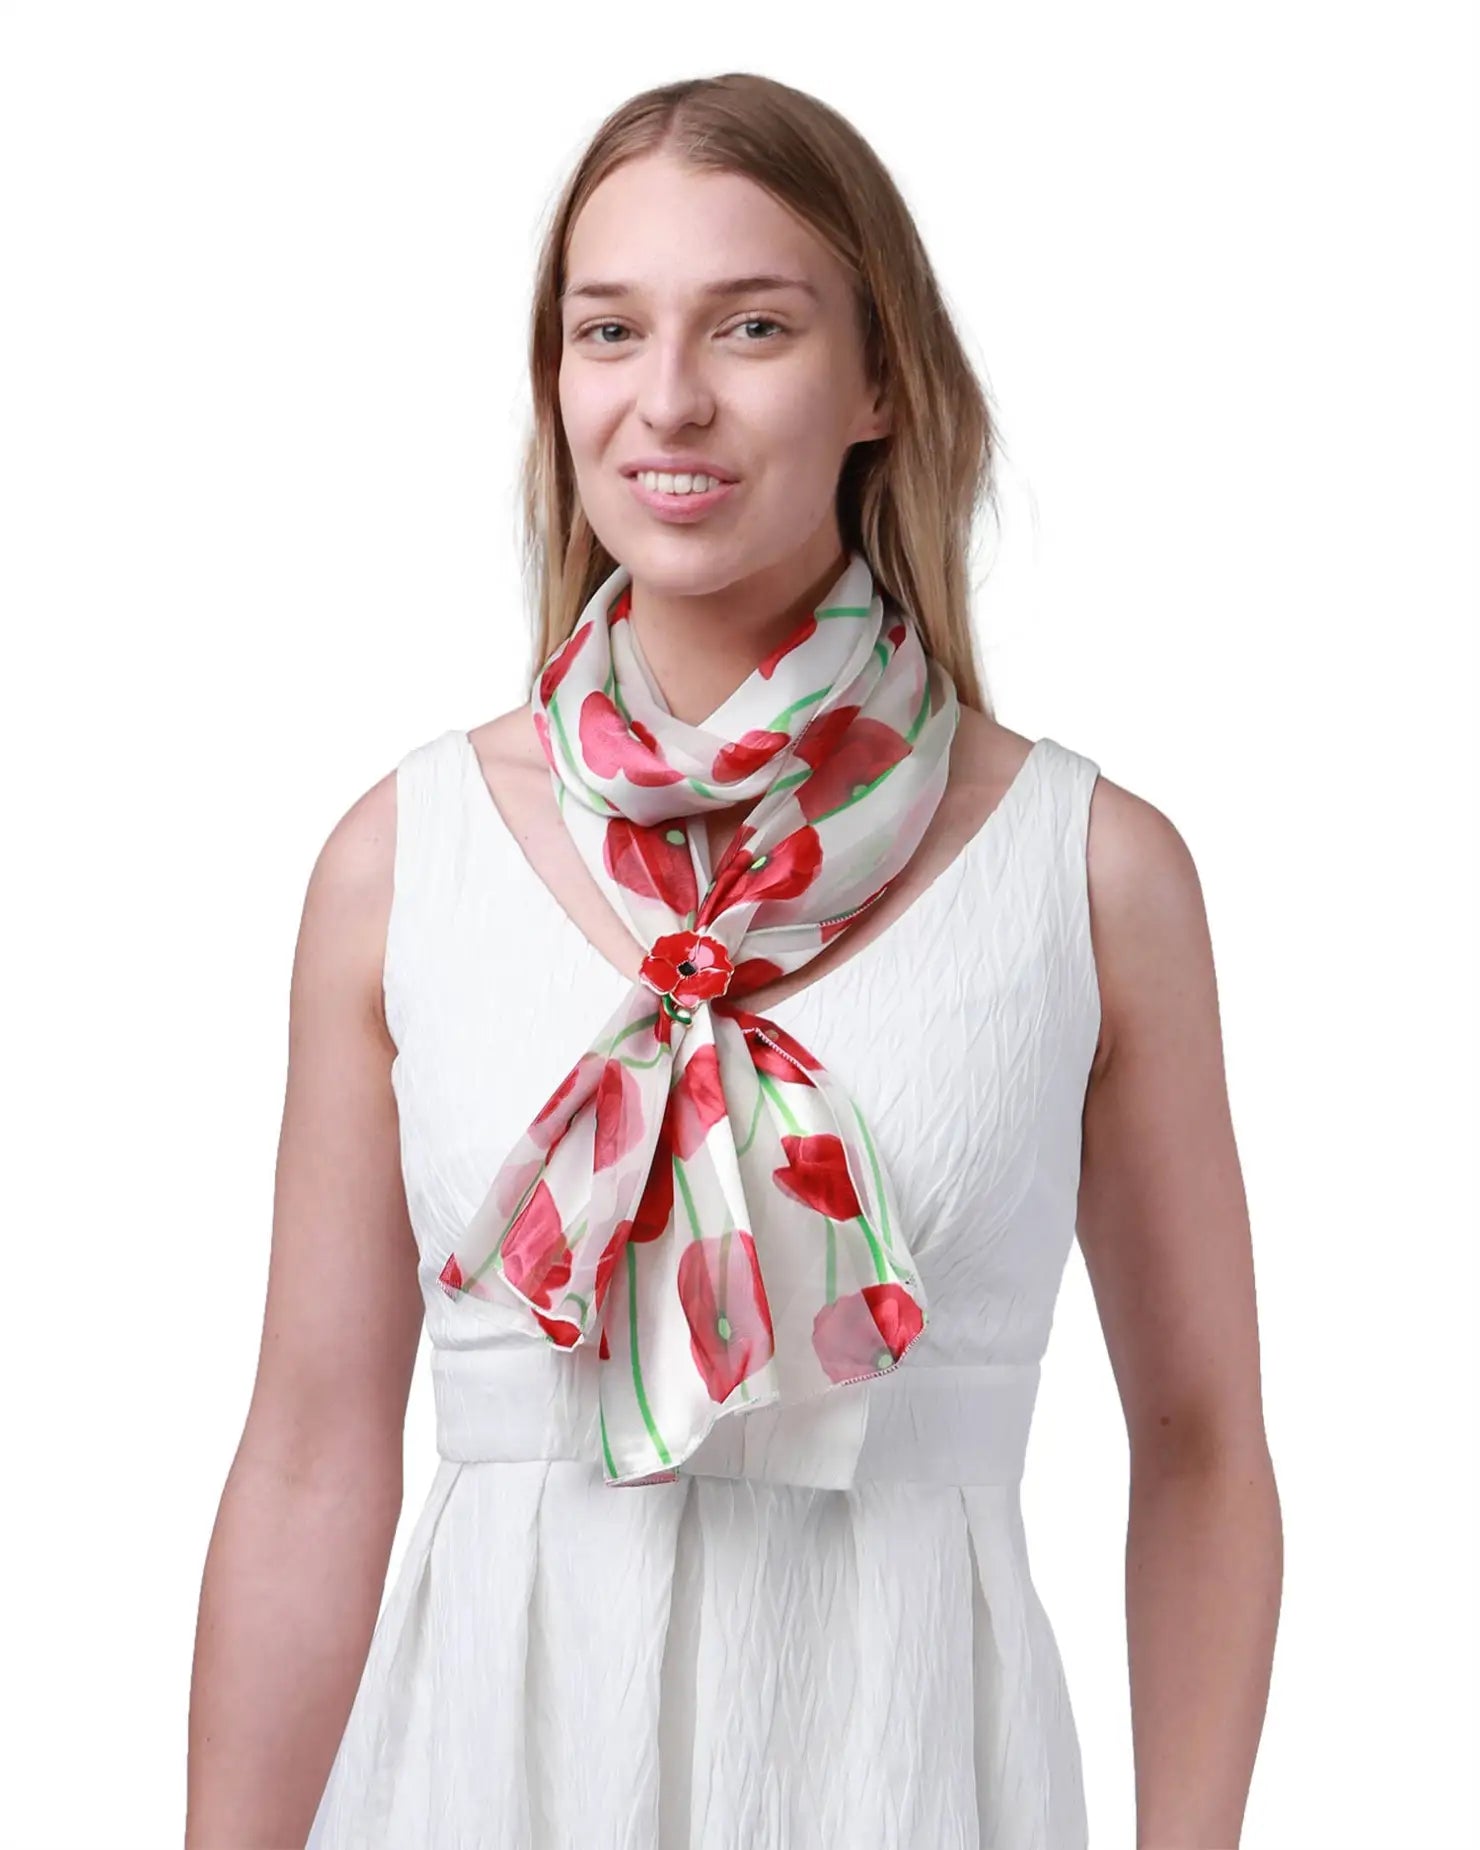 Woman in white dress wearing red and green poppy floral print scarf